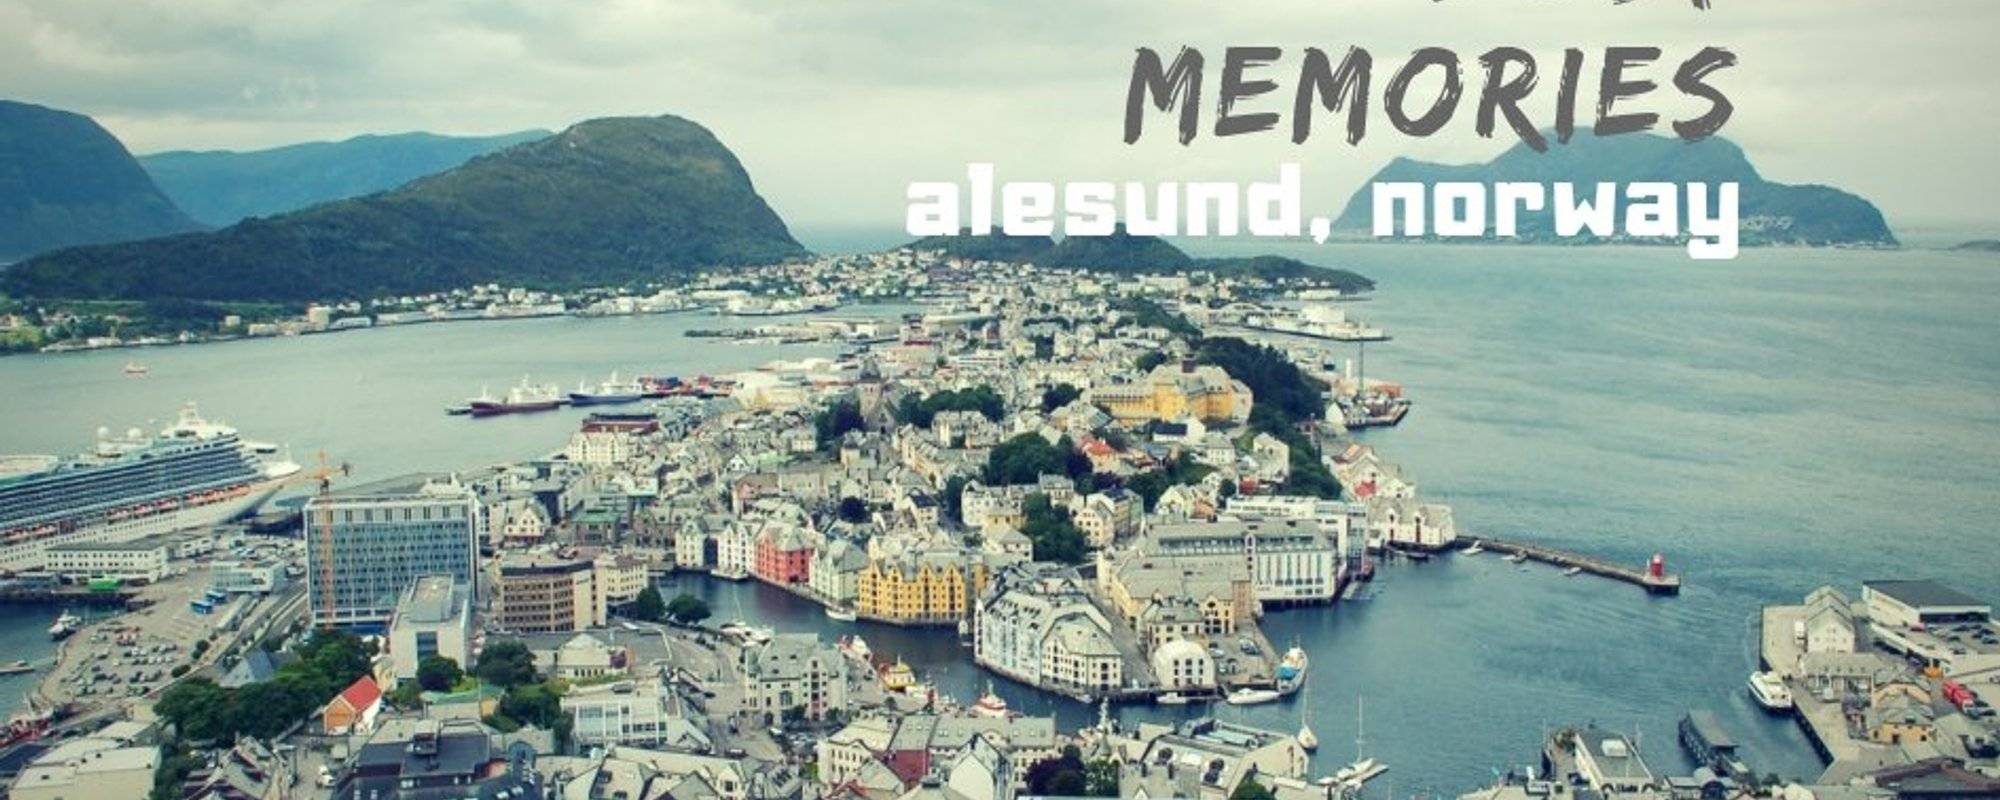 Recovering lost memories from Alesund in Norway 挪威的奧勒松